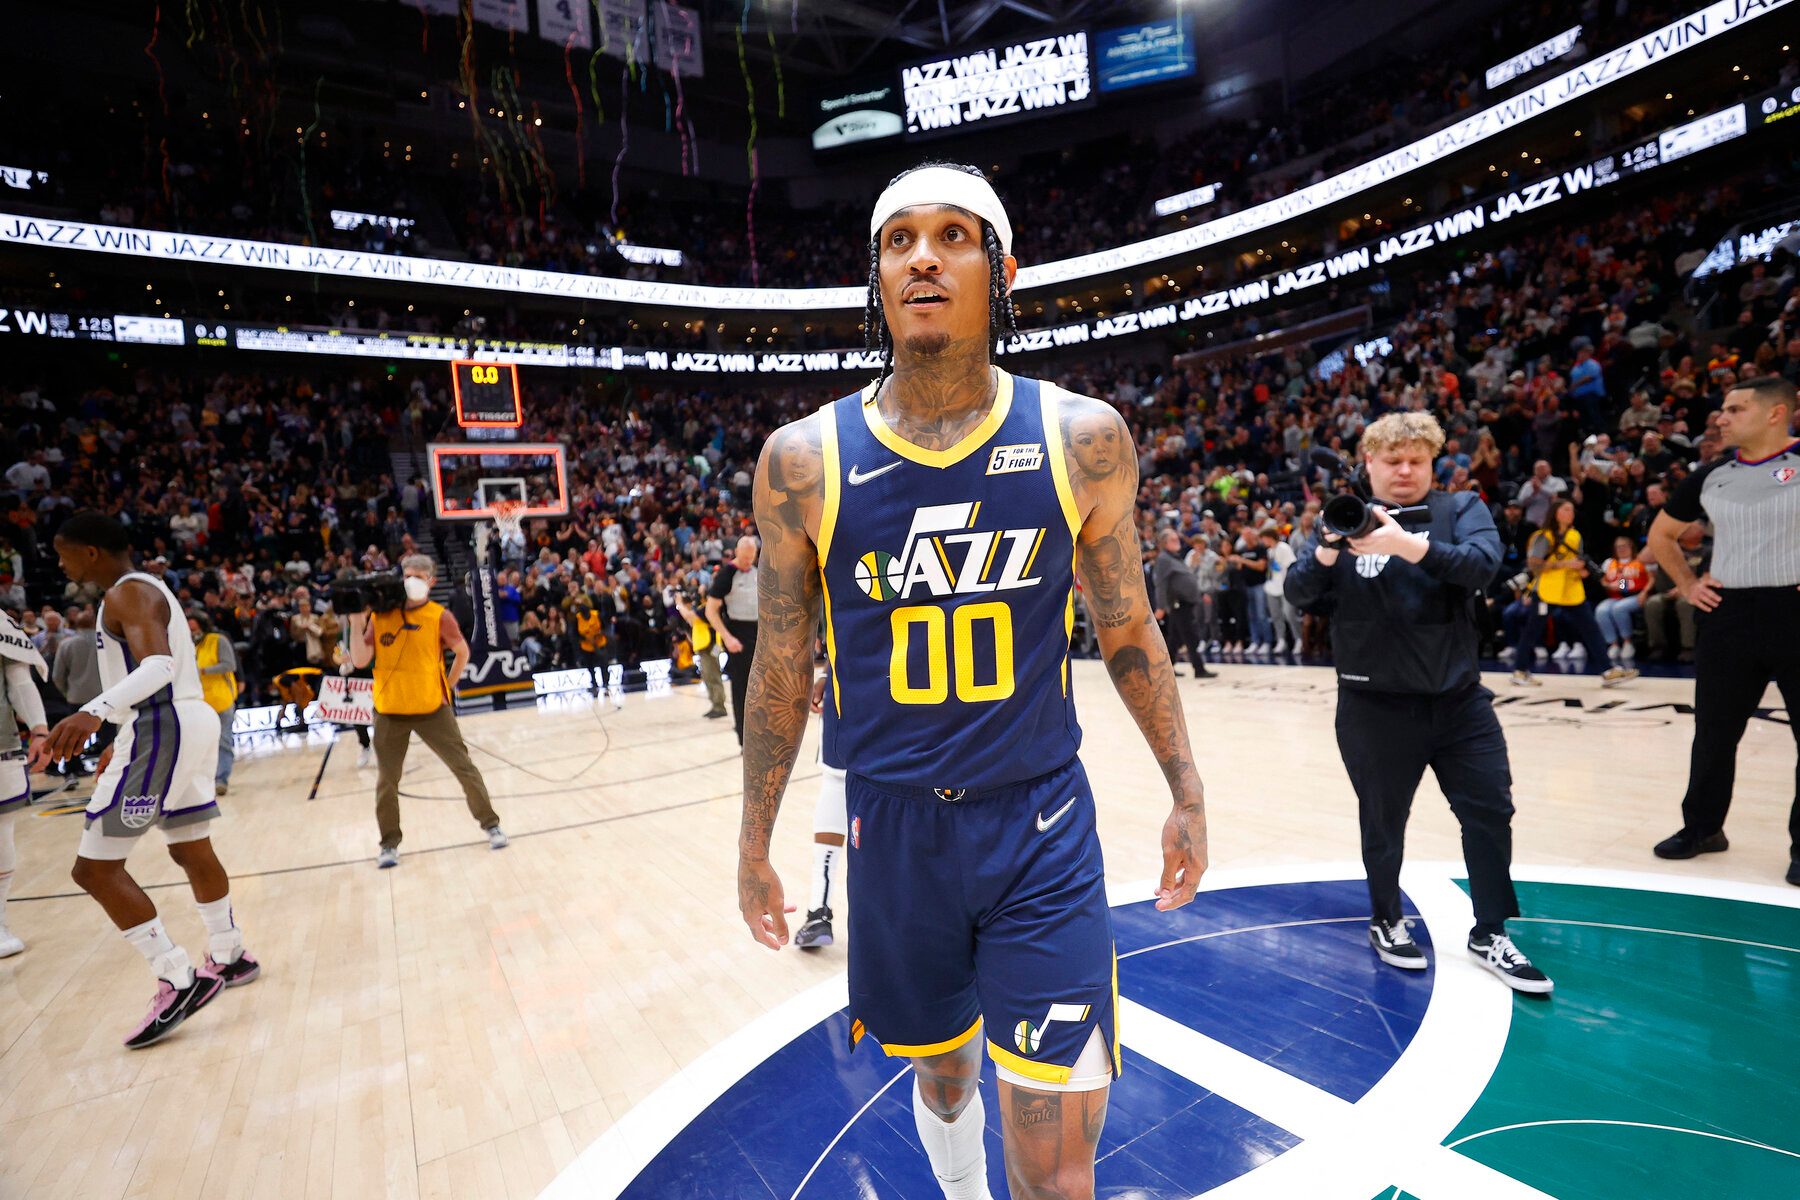 Jordan Clarkson erupts for 45 points to lead Jazz past Kings